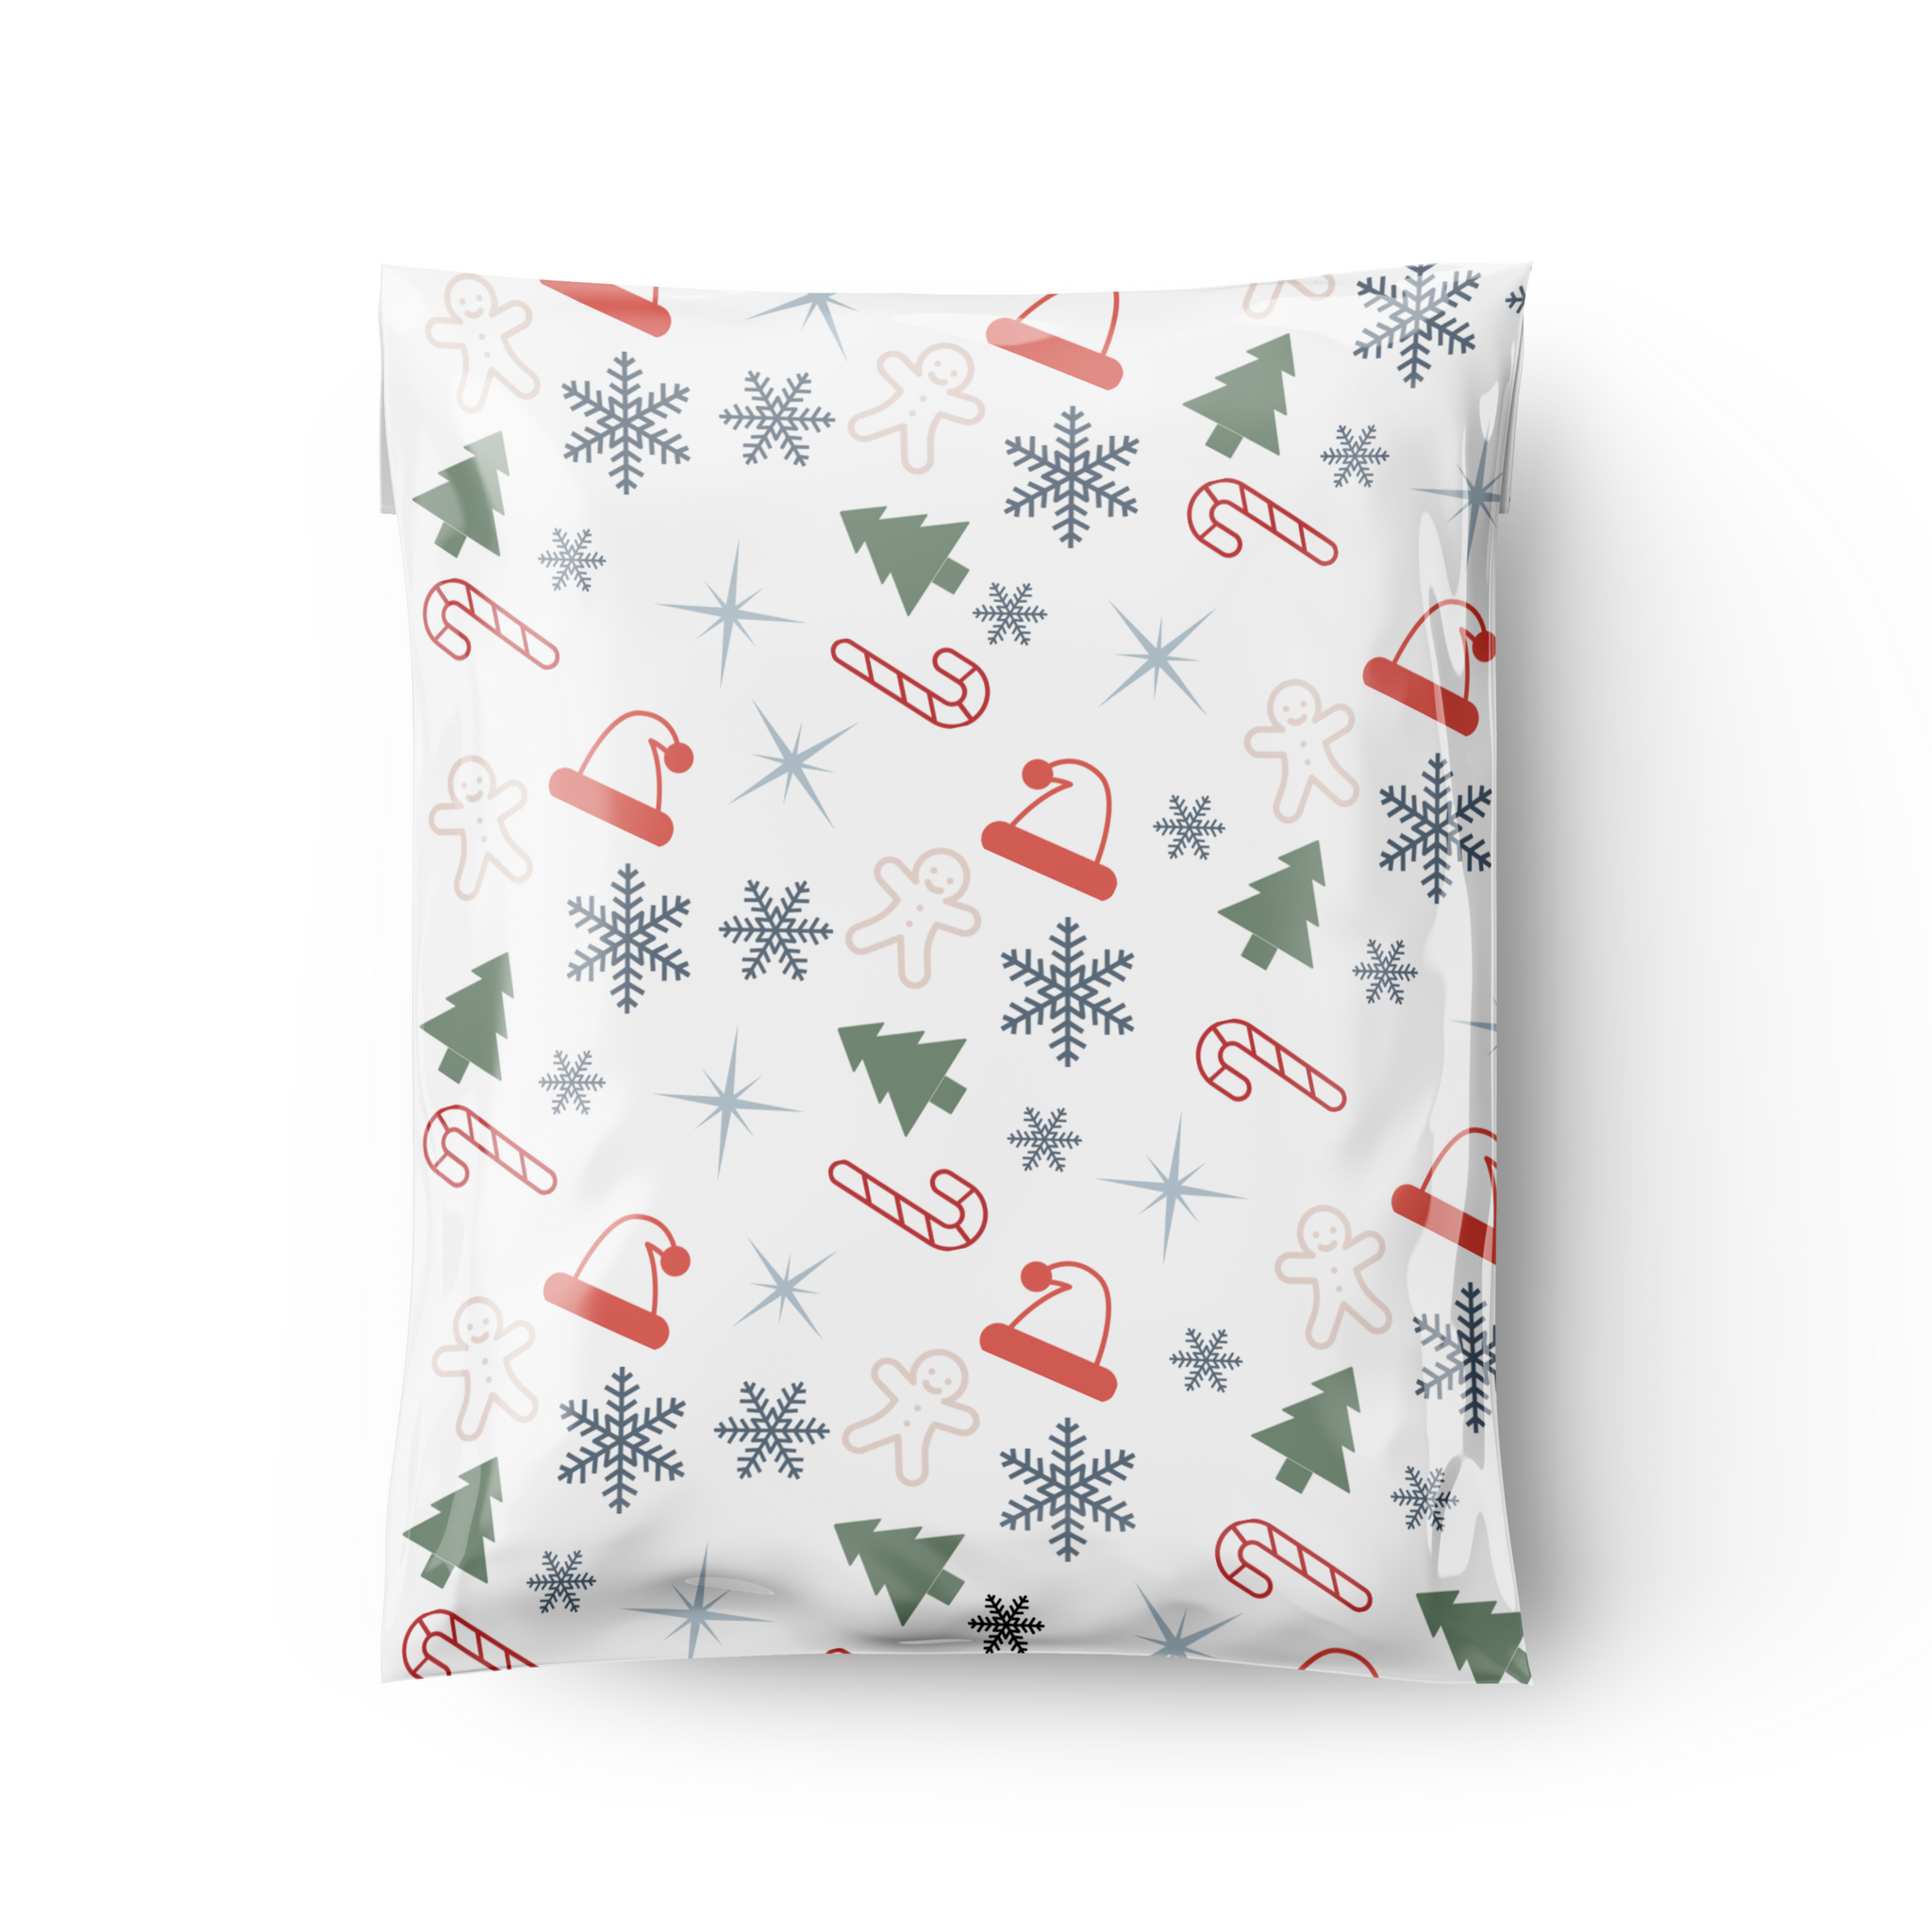 Cute Christmas Poly Mailers - Holiday Mailers Small Business Sply